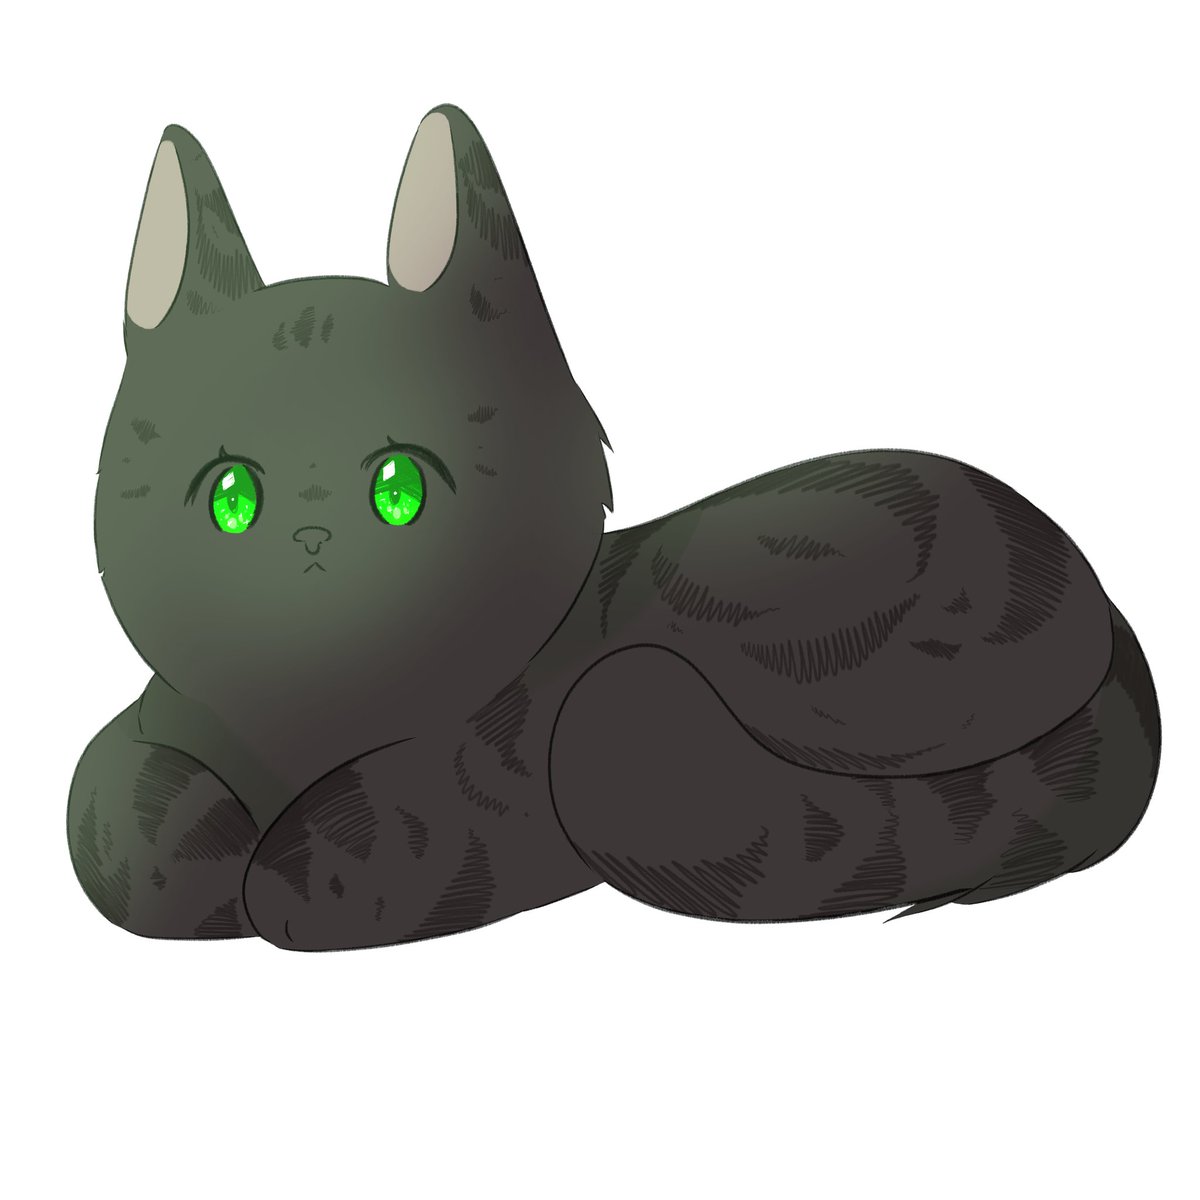 #WarriorCats

Crowtail for the 84th day